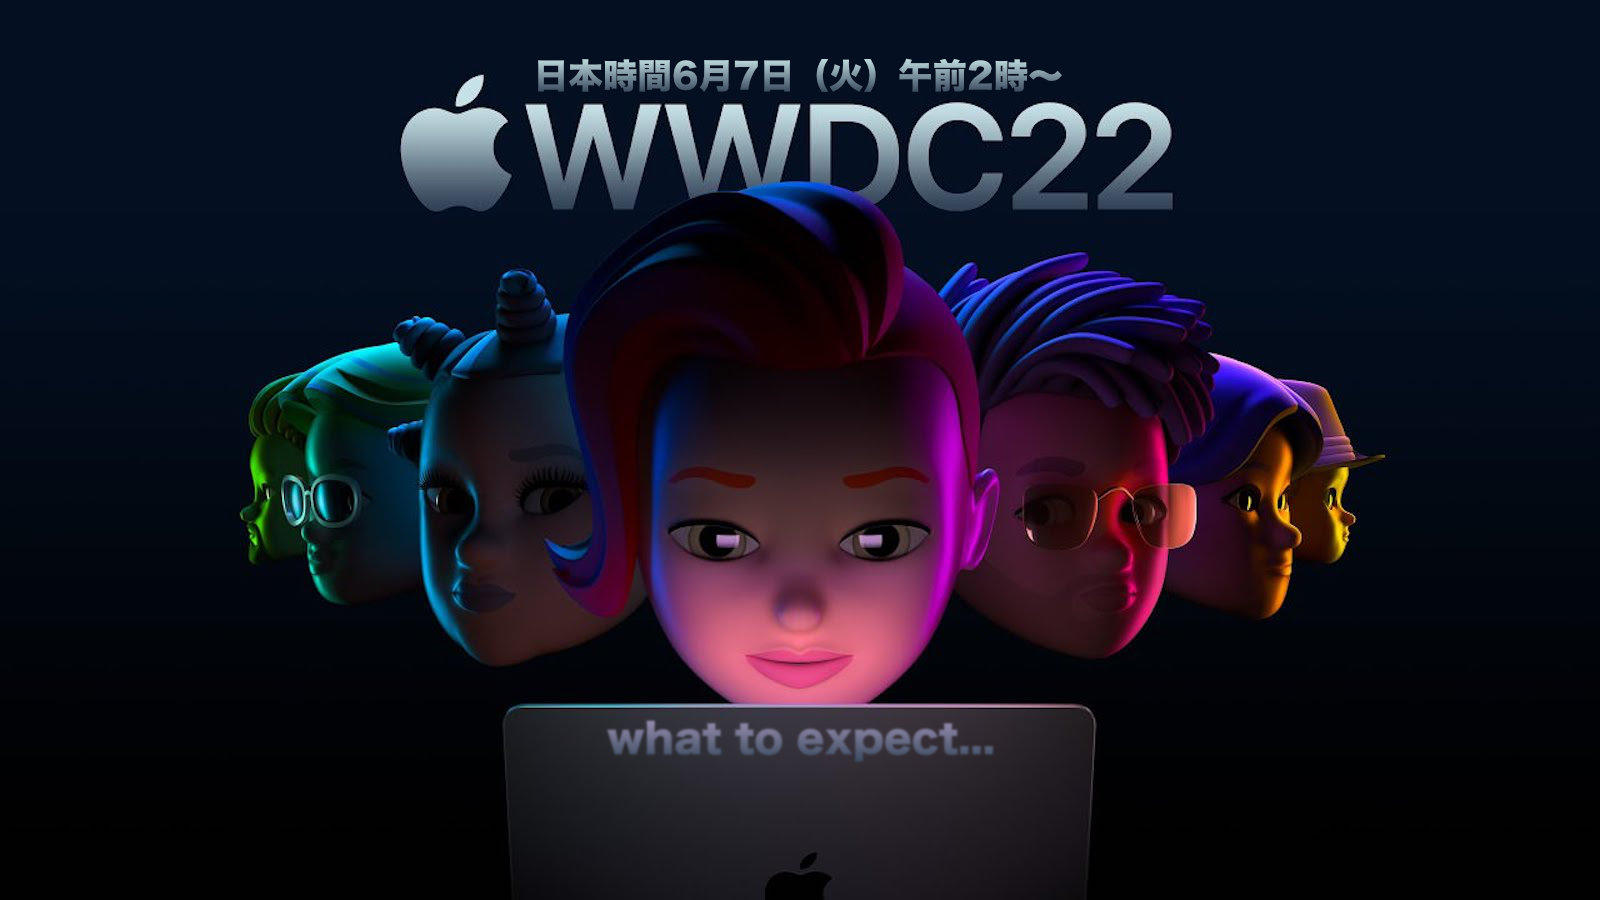 WWDC22-What-to-Expect-at-Keynote.jpg